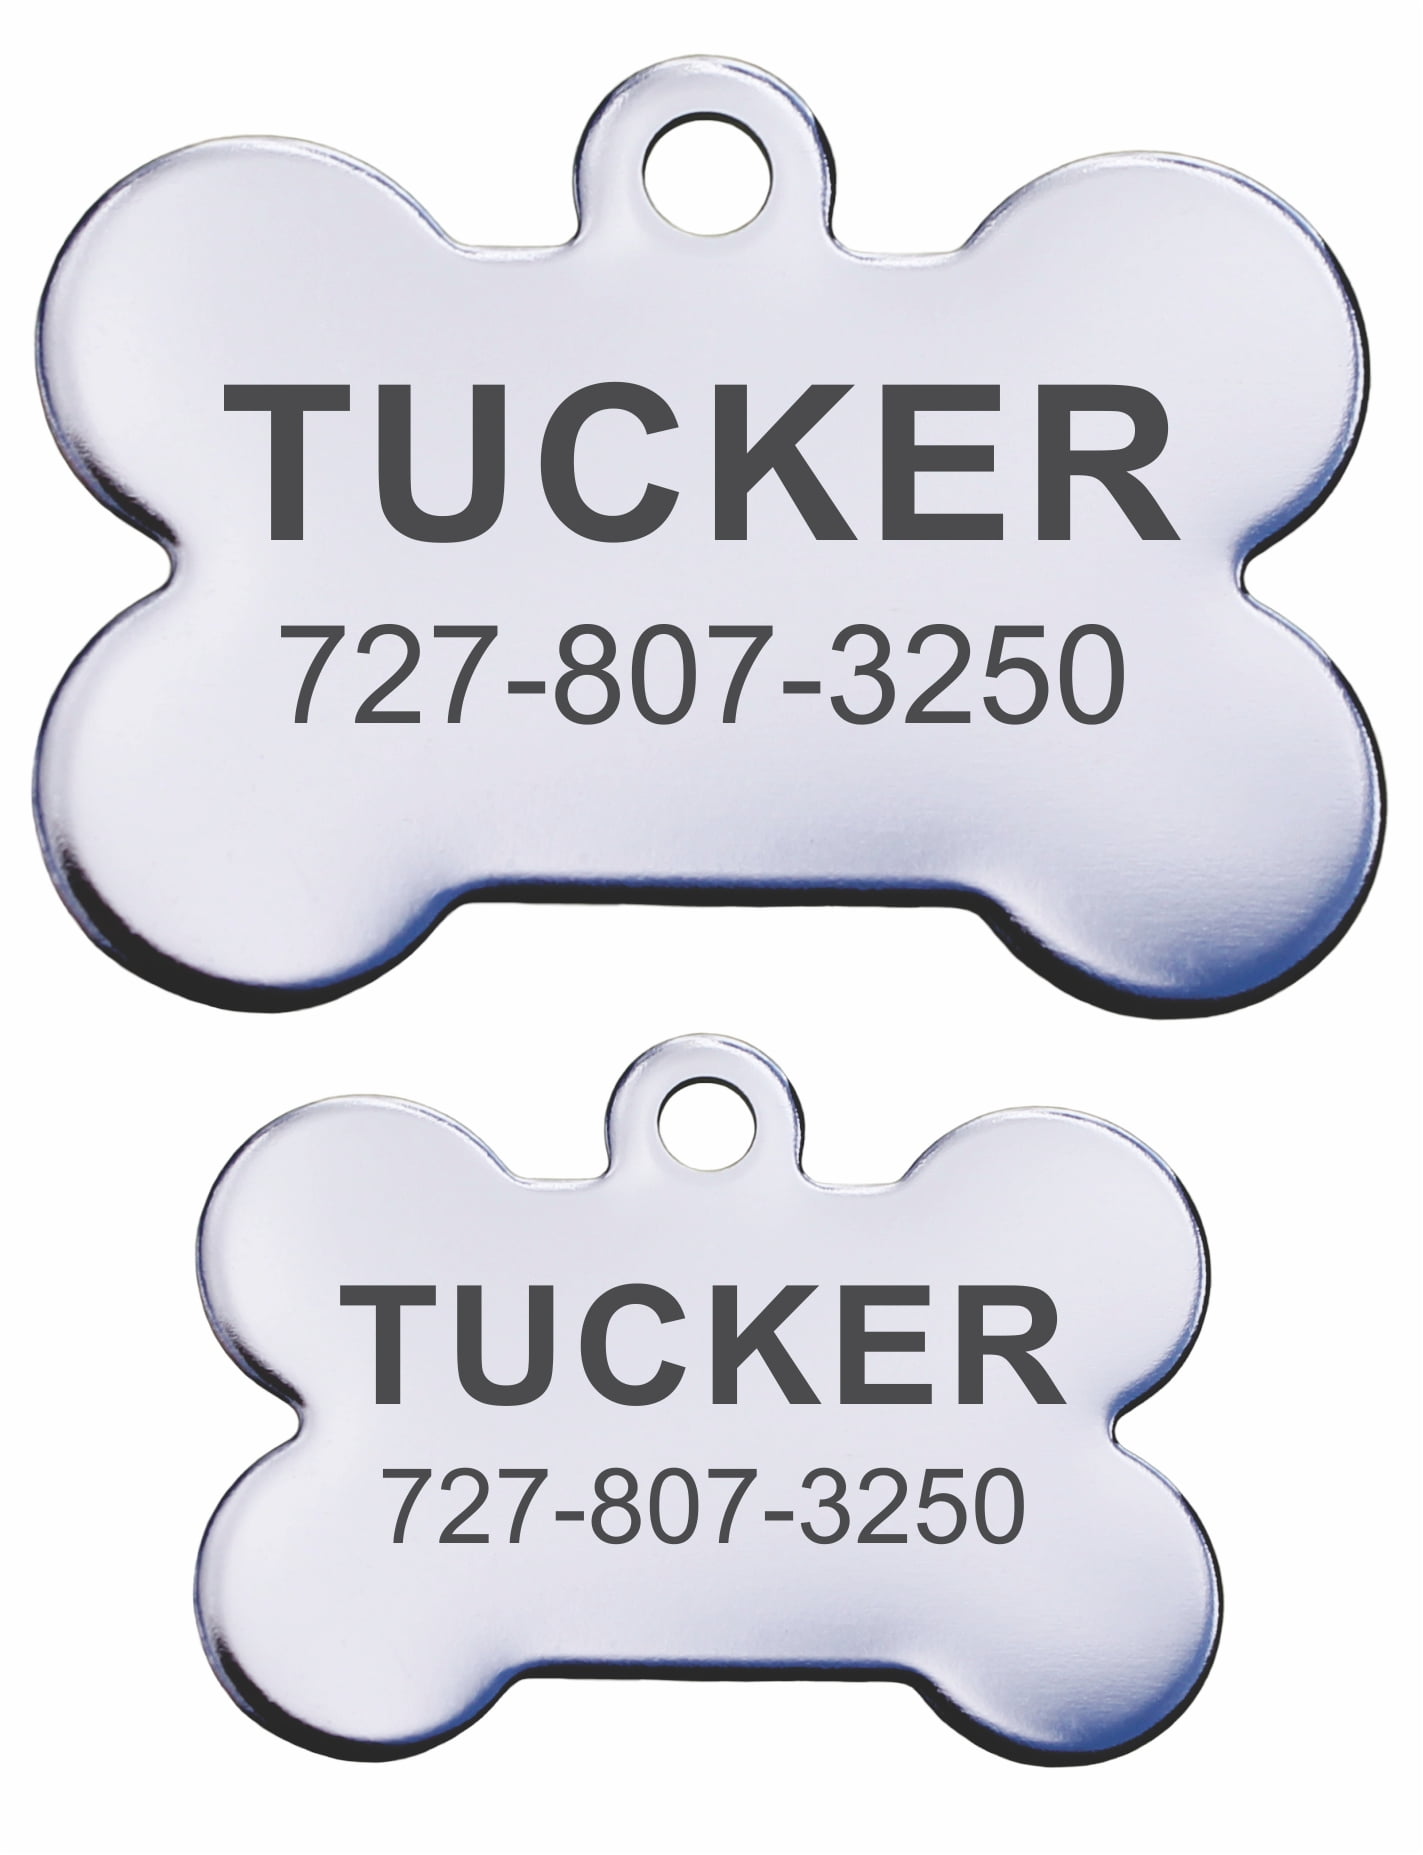 Stainless Steel Personalized Pet ID Tags - Bone - Walmart.com Stainless Steel Dog Tags For Pets